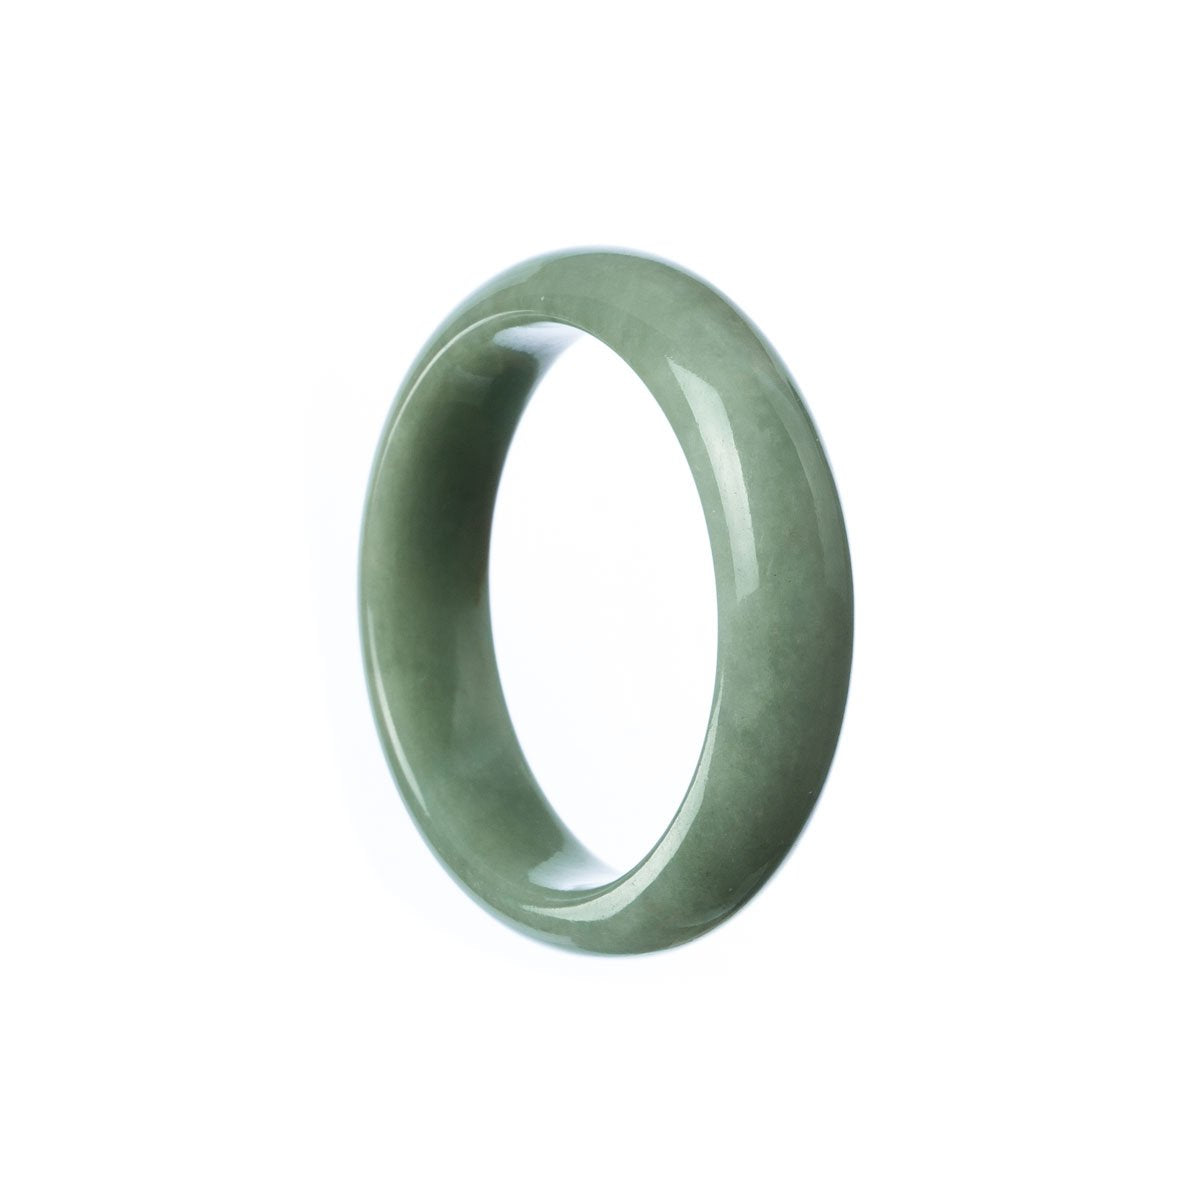 A half-moon shaped, child-sized bangle bracelet made of genuine untreated green jade from MAYS GEMS.